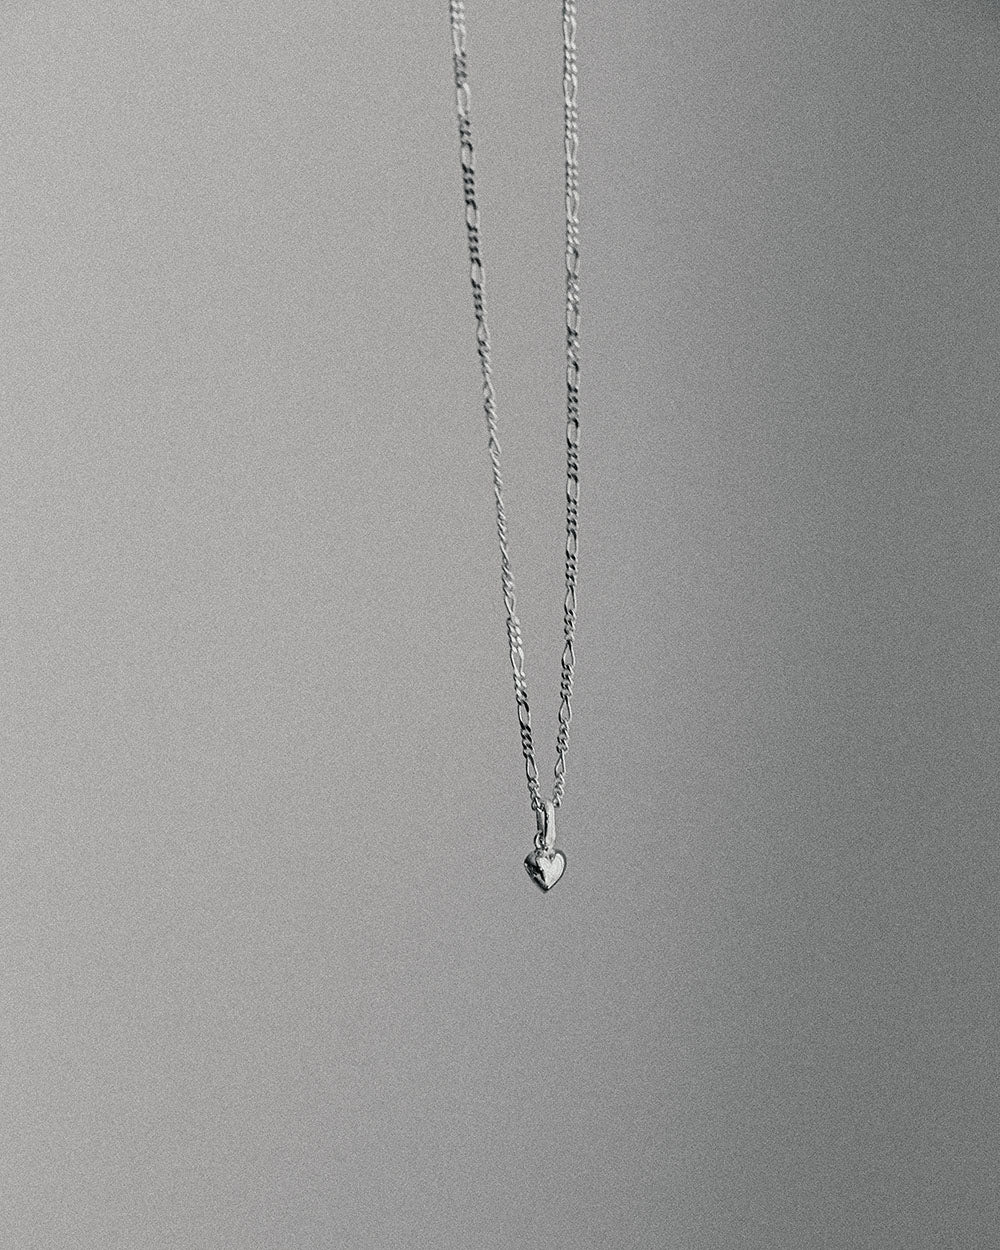 soft and sticky Pendant measures about 5mm, Figaro chain is shy of 2mm wide. Photos show the Minikin Necklace strung on a 20" chain paired with the Round Snake Chain (Thin). Made from Sterling Silver that doesn’t contain metal additions that can typically cause infections or allergic reactions.